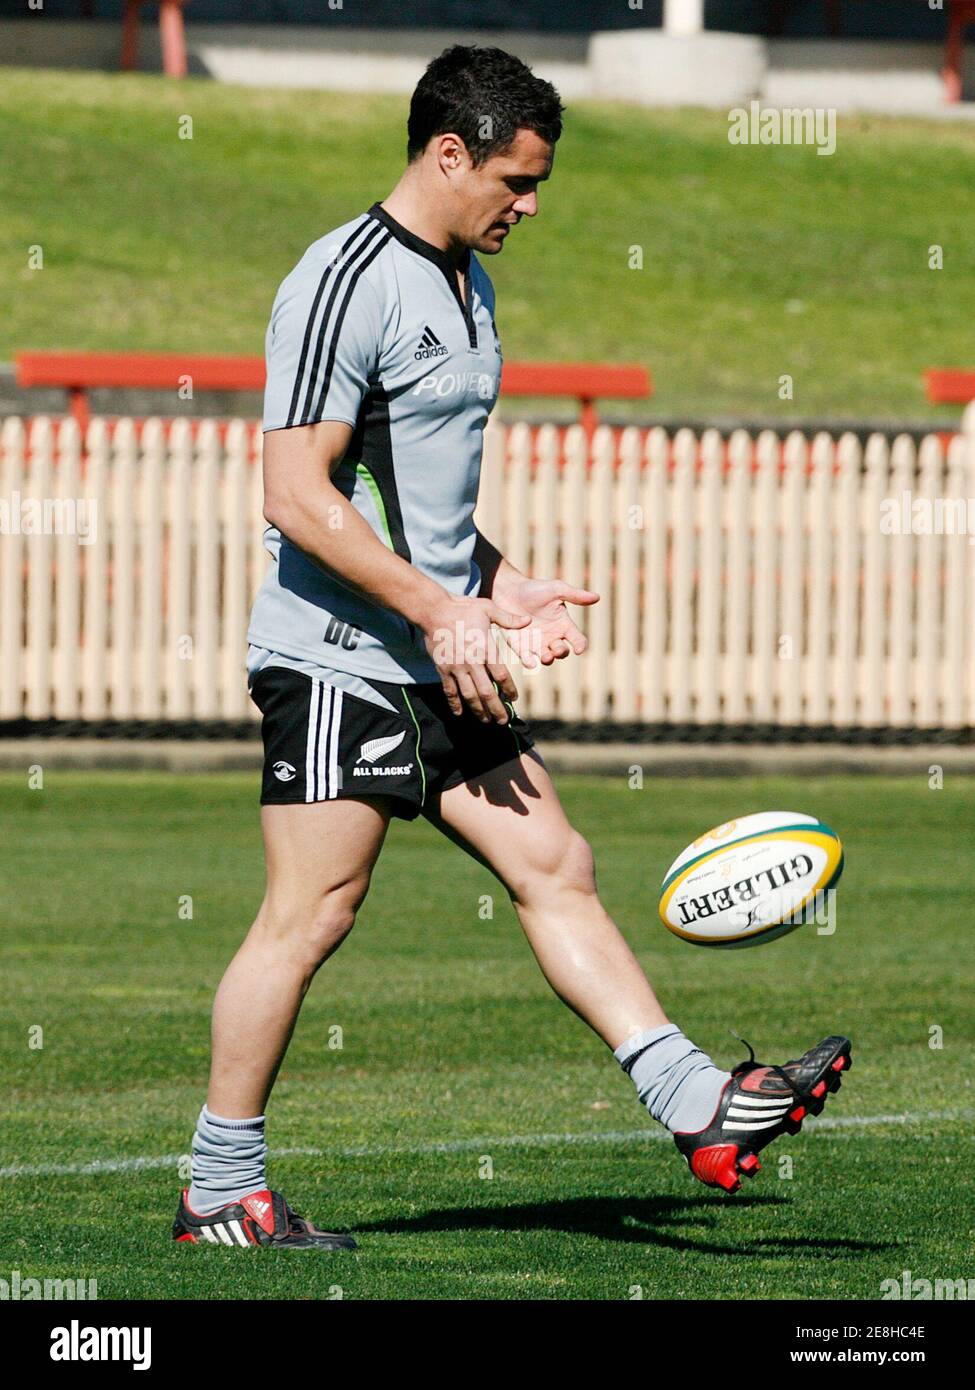 New Zealand All Blacks player Dan Carter kicks the ball during a training  session in Sydney August 18, 2009. New Zealand will face Australia on  August 22 in Sydney. REUTERS/Daniel Munoz (AUSTRALIA